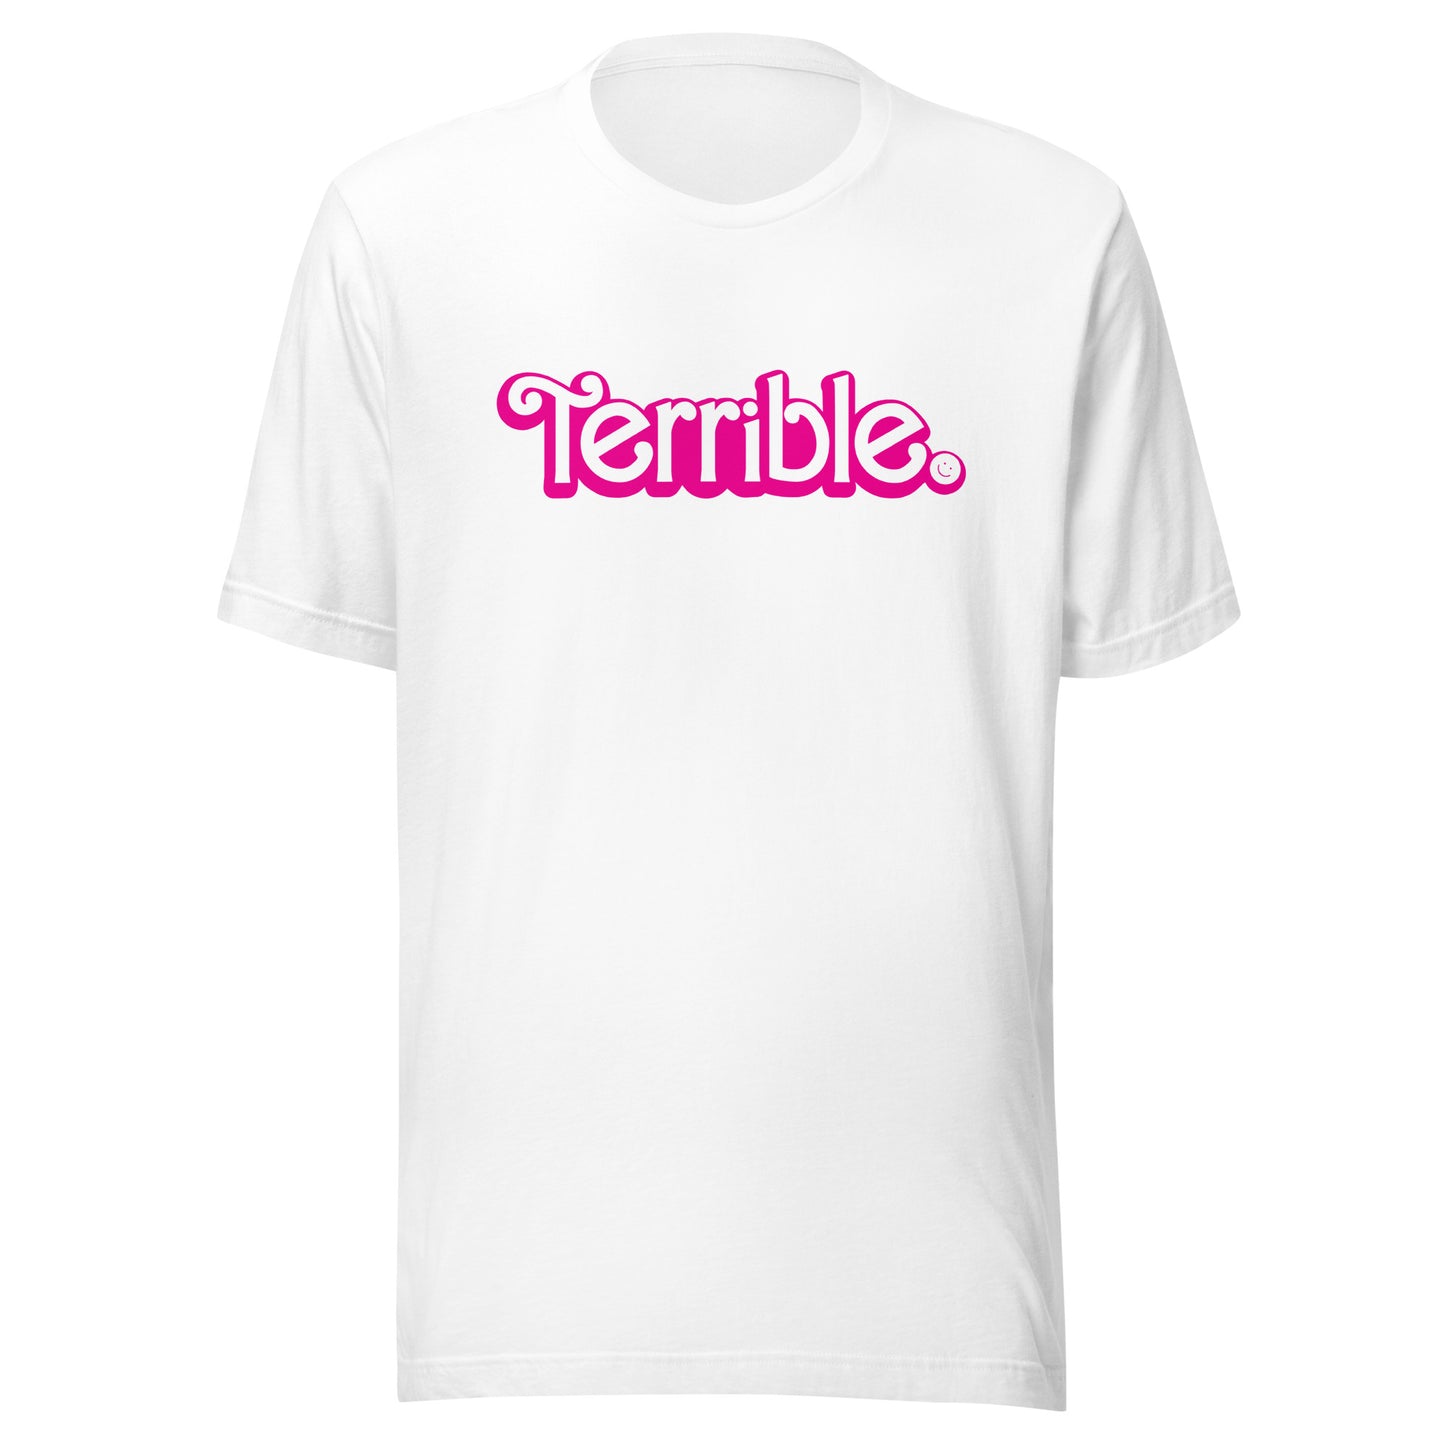 This Barbie is Terrible - Cotton Tee